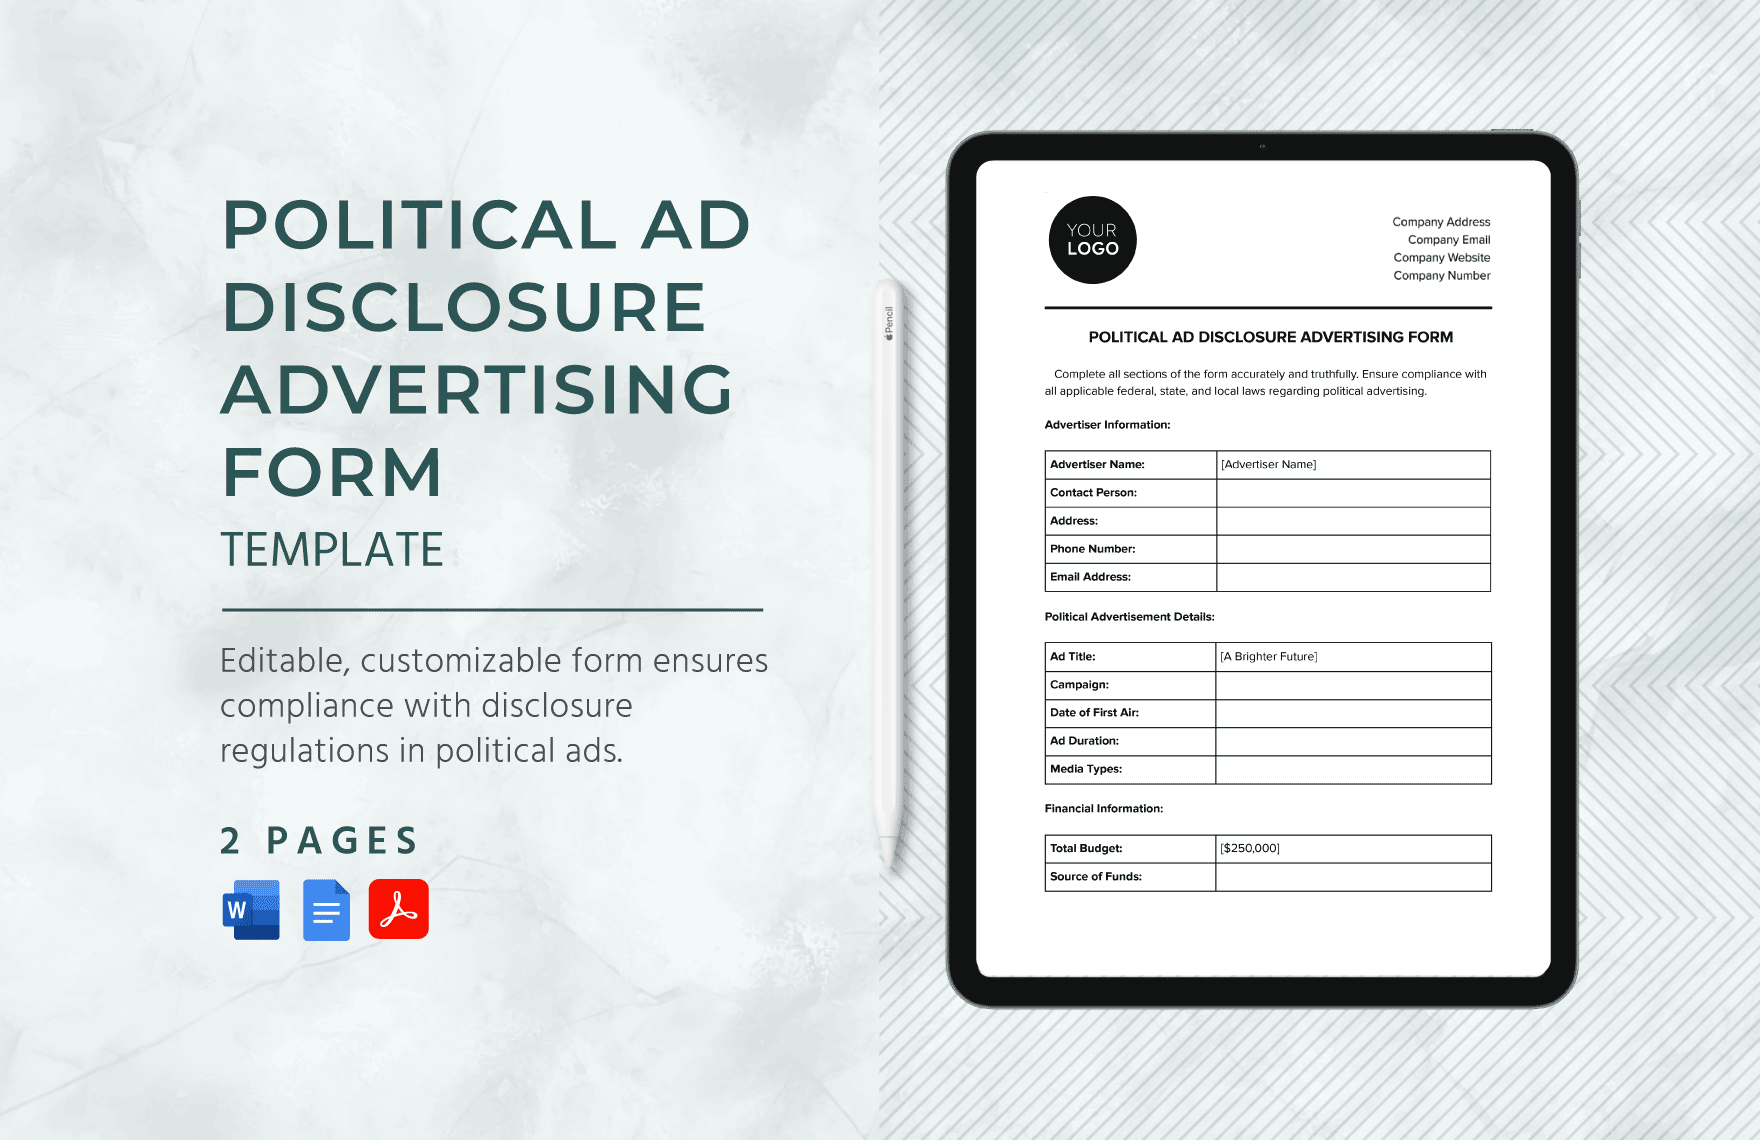 Political Ad Disclosure Advertising Form Template in Word, Google Docs, PDF